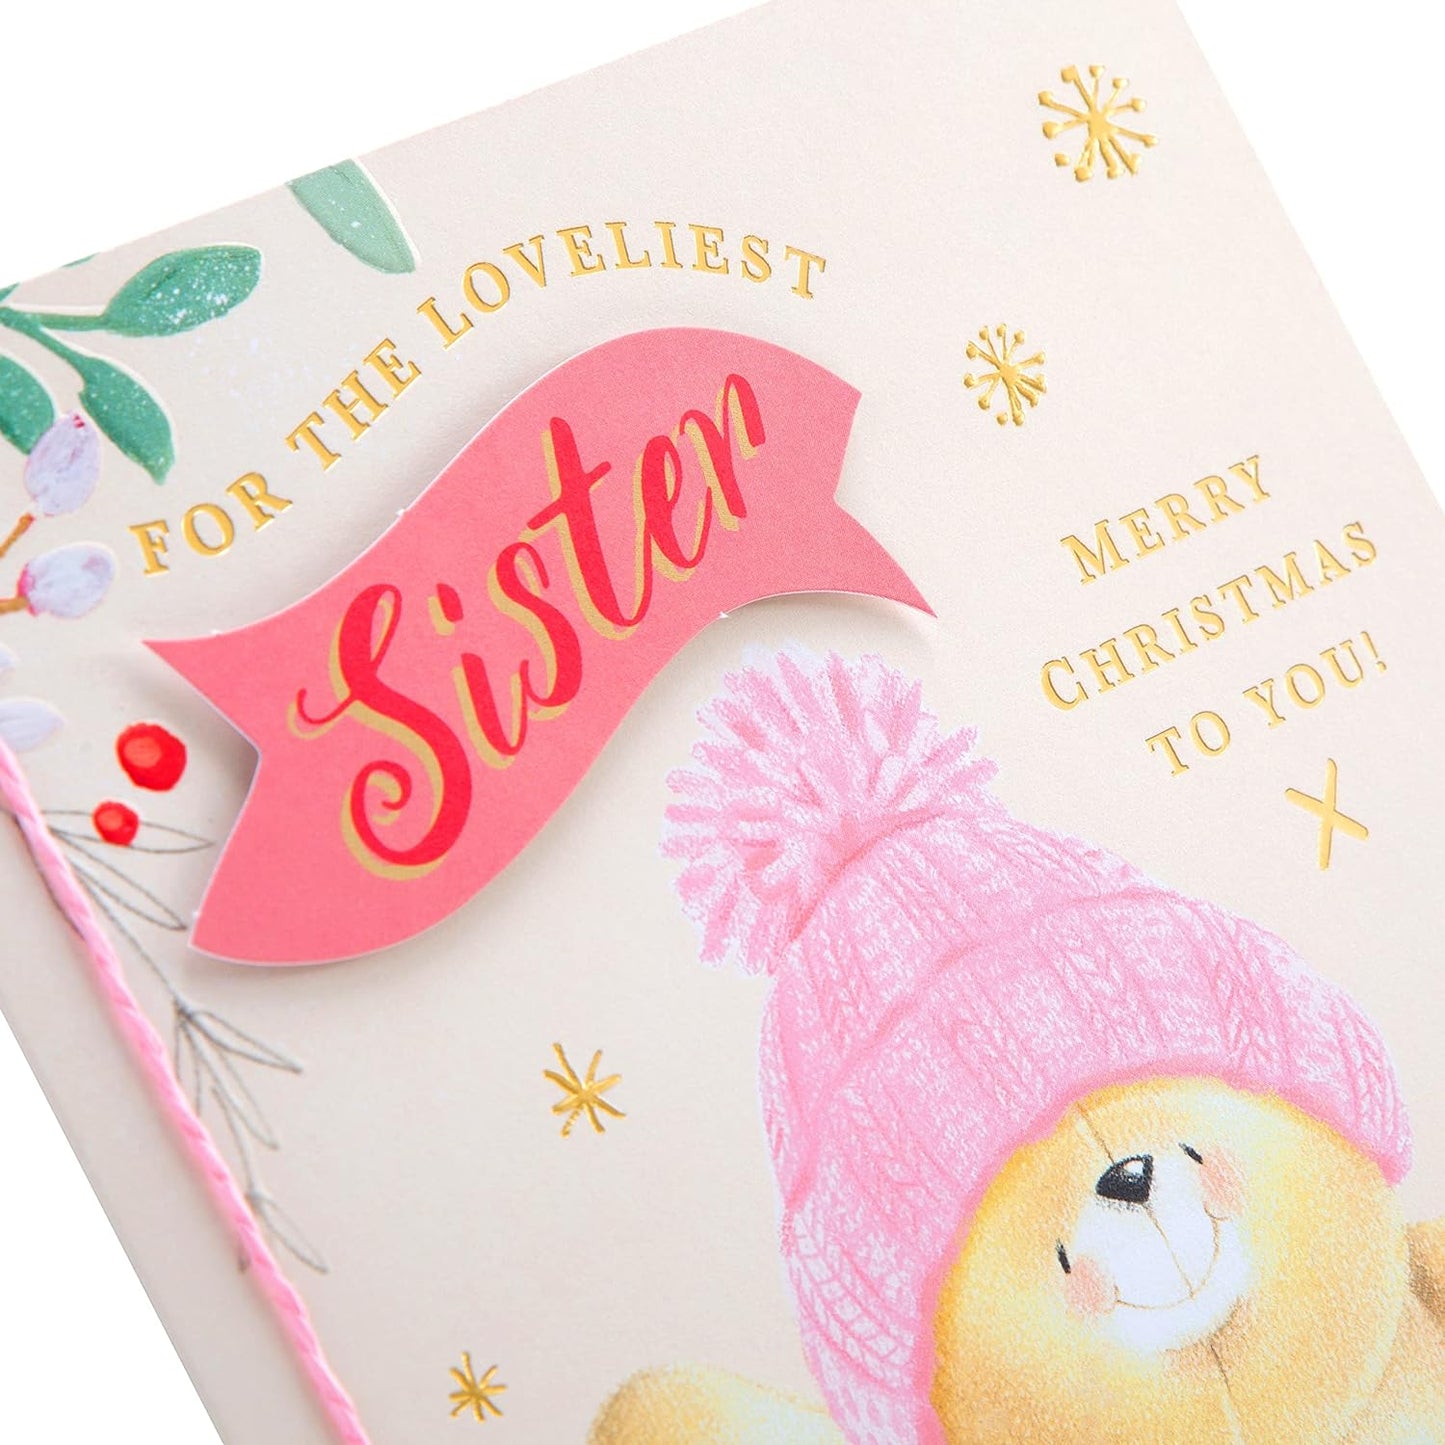 Cute Forever Friends Design Sister Christmas Card